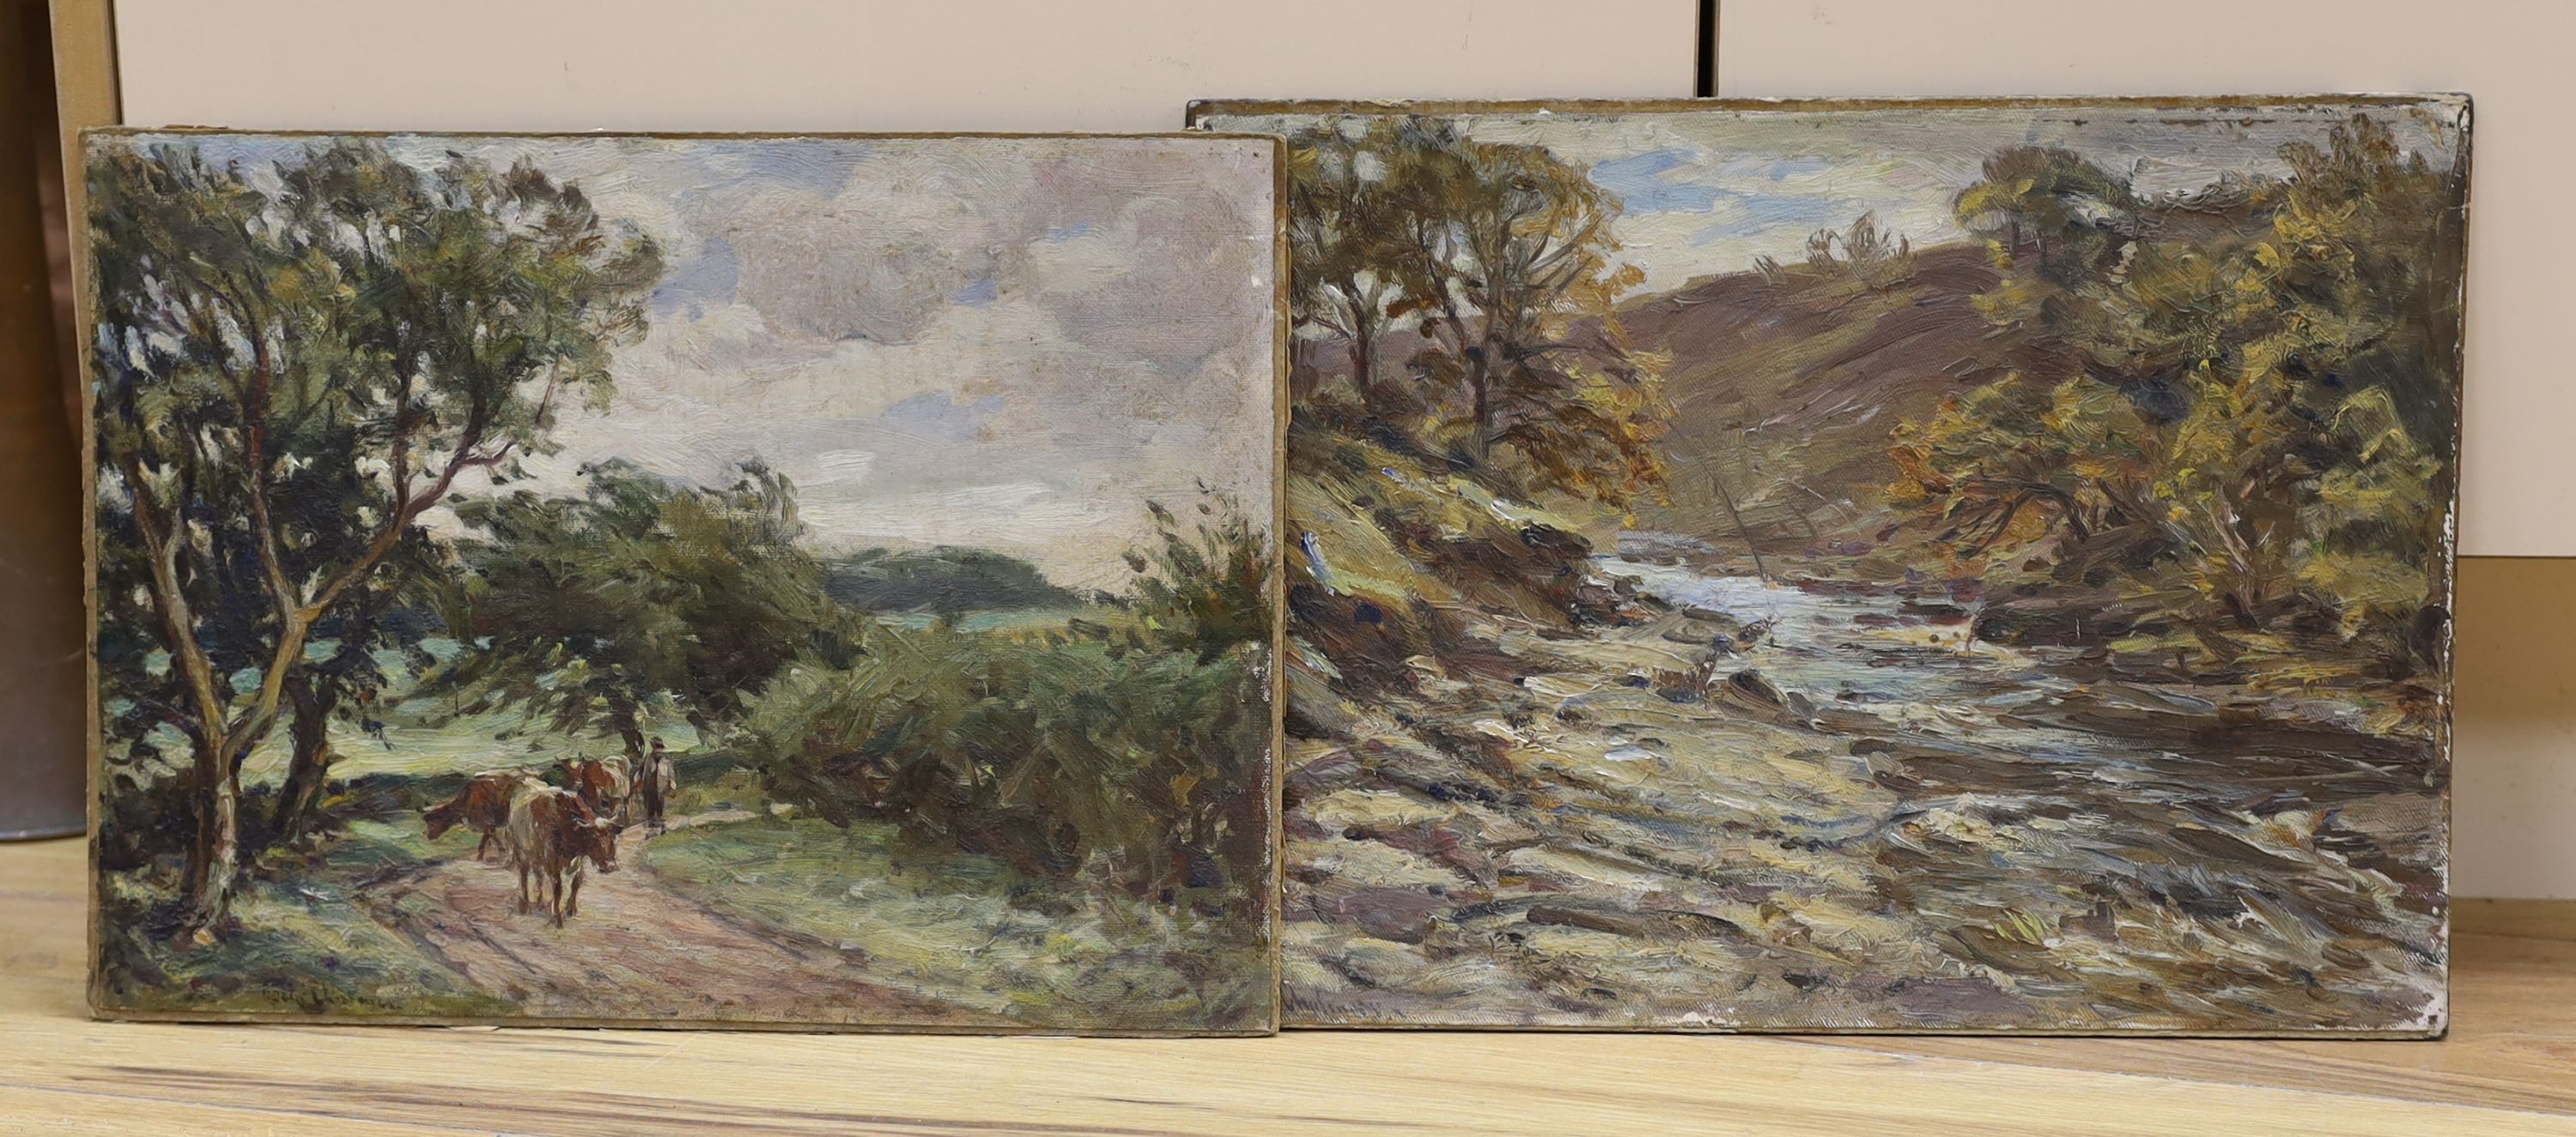 Hector Chalmers (1849-1943), two oils on canvas laid on card, 'On the Fenwick, Ayrshire' and 'On The Bearsden, Scotland', signed, 28 x 39cm, unframed